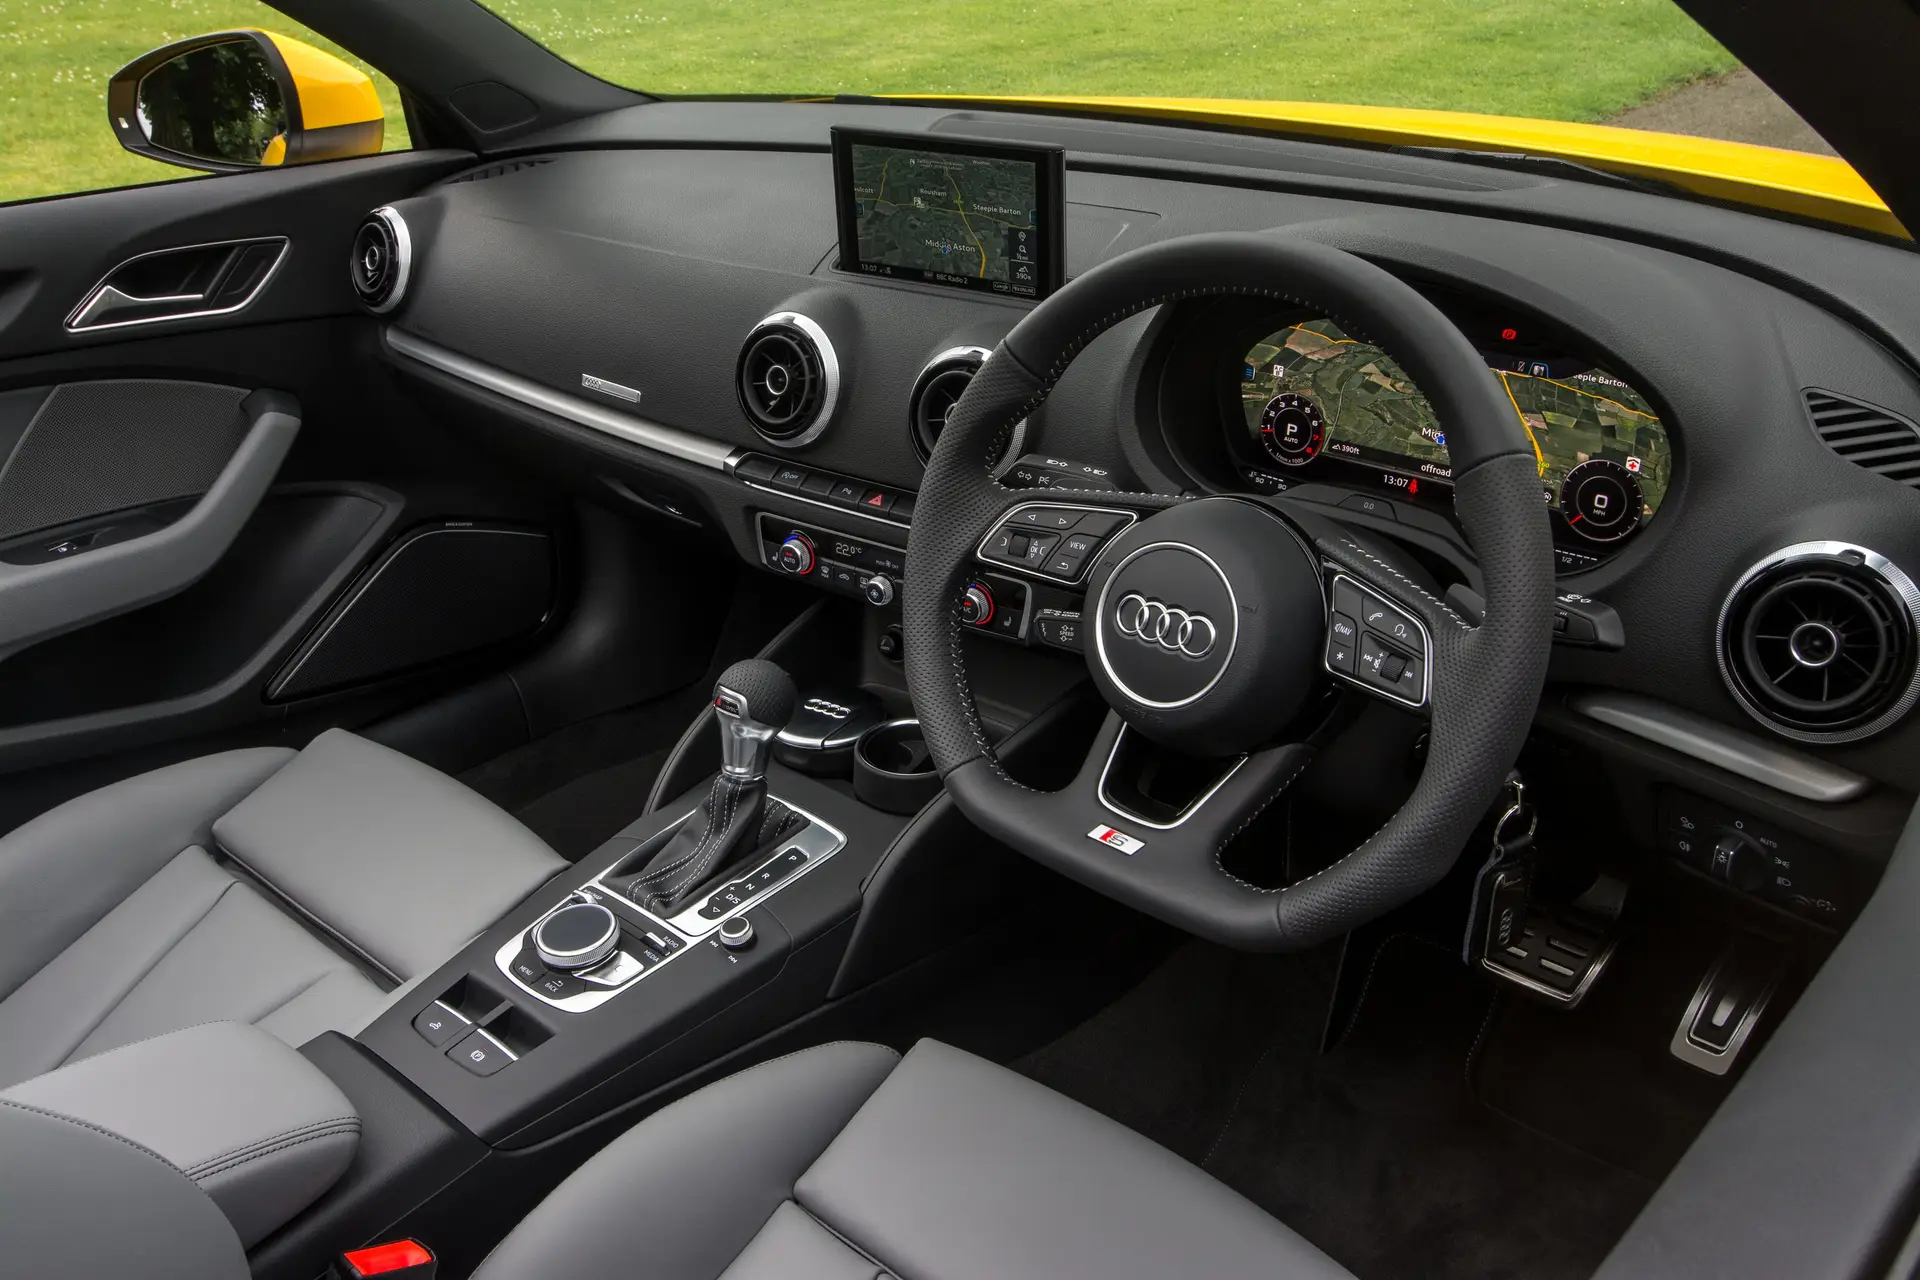  Audi A3 Cabriolet Review 2023: close up interior photo of the Audi A3 Cabriolet dashboard 